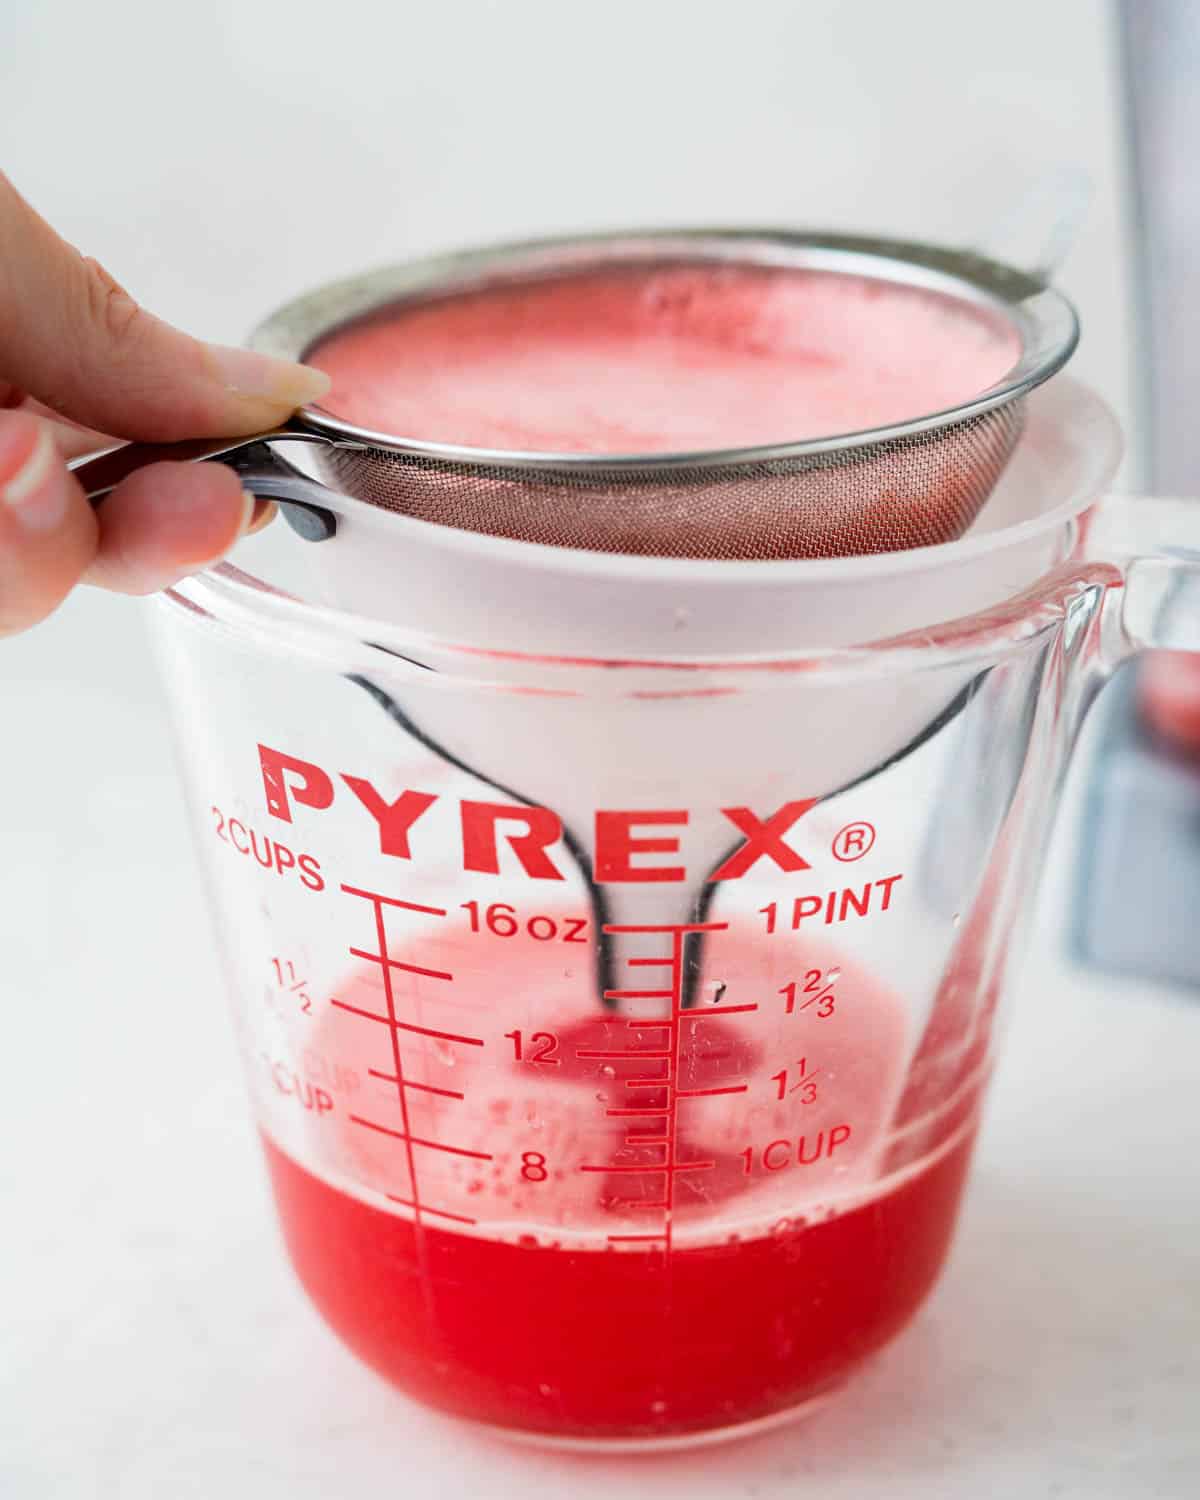 Straining watermelon juice through a mesh strainer into a glass measuring cup.